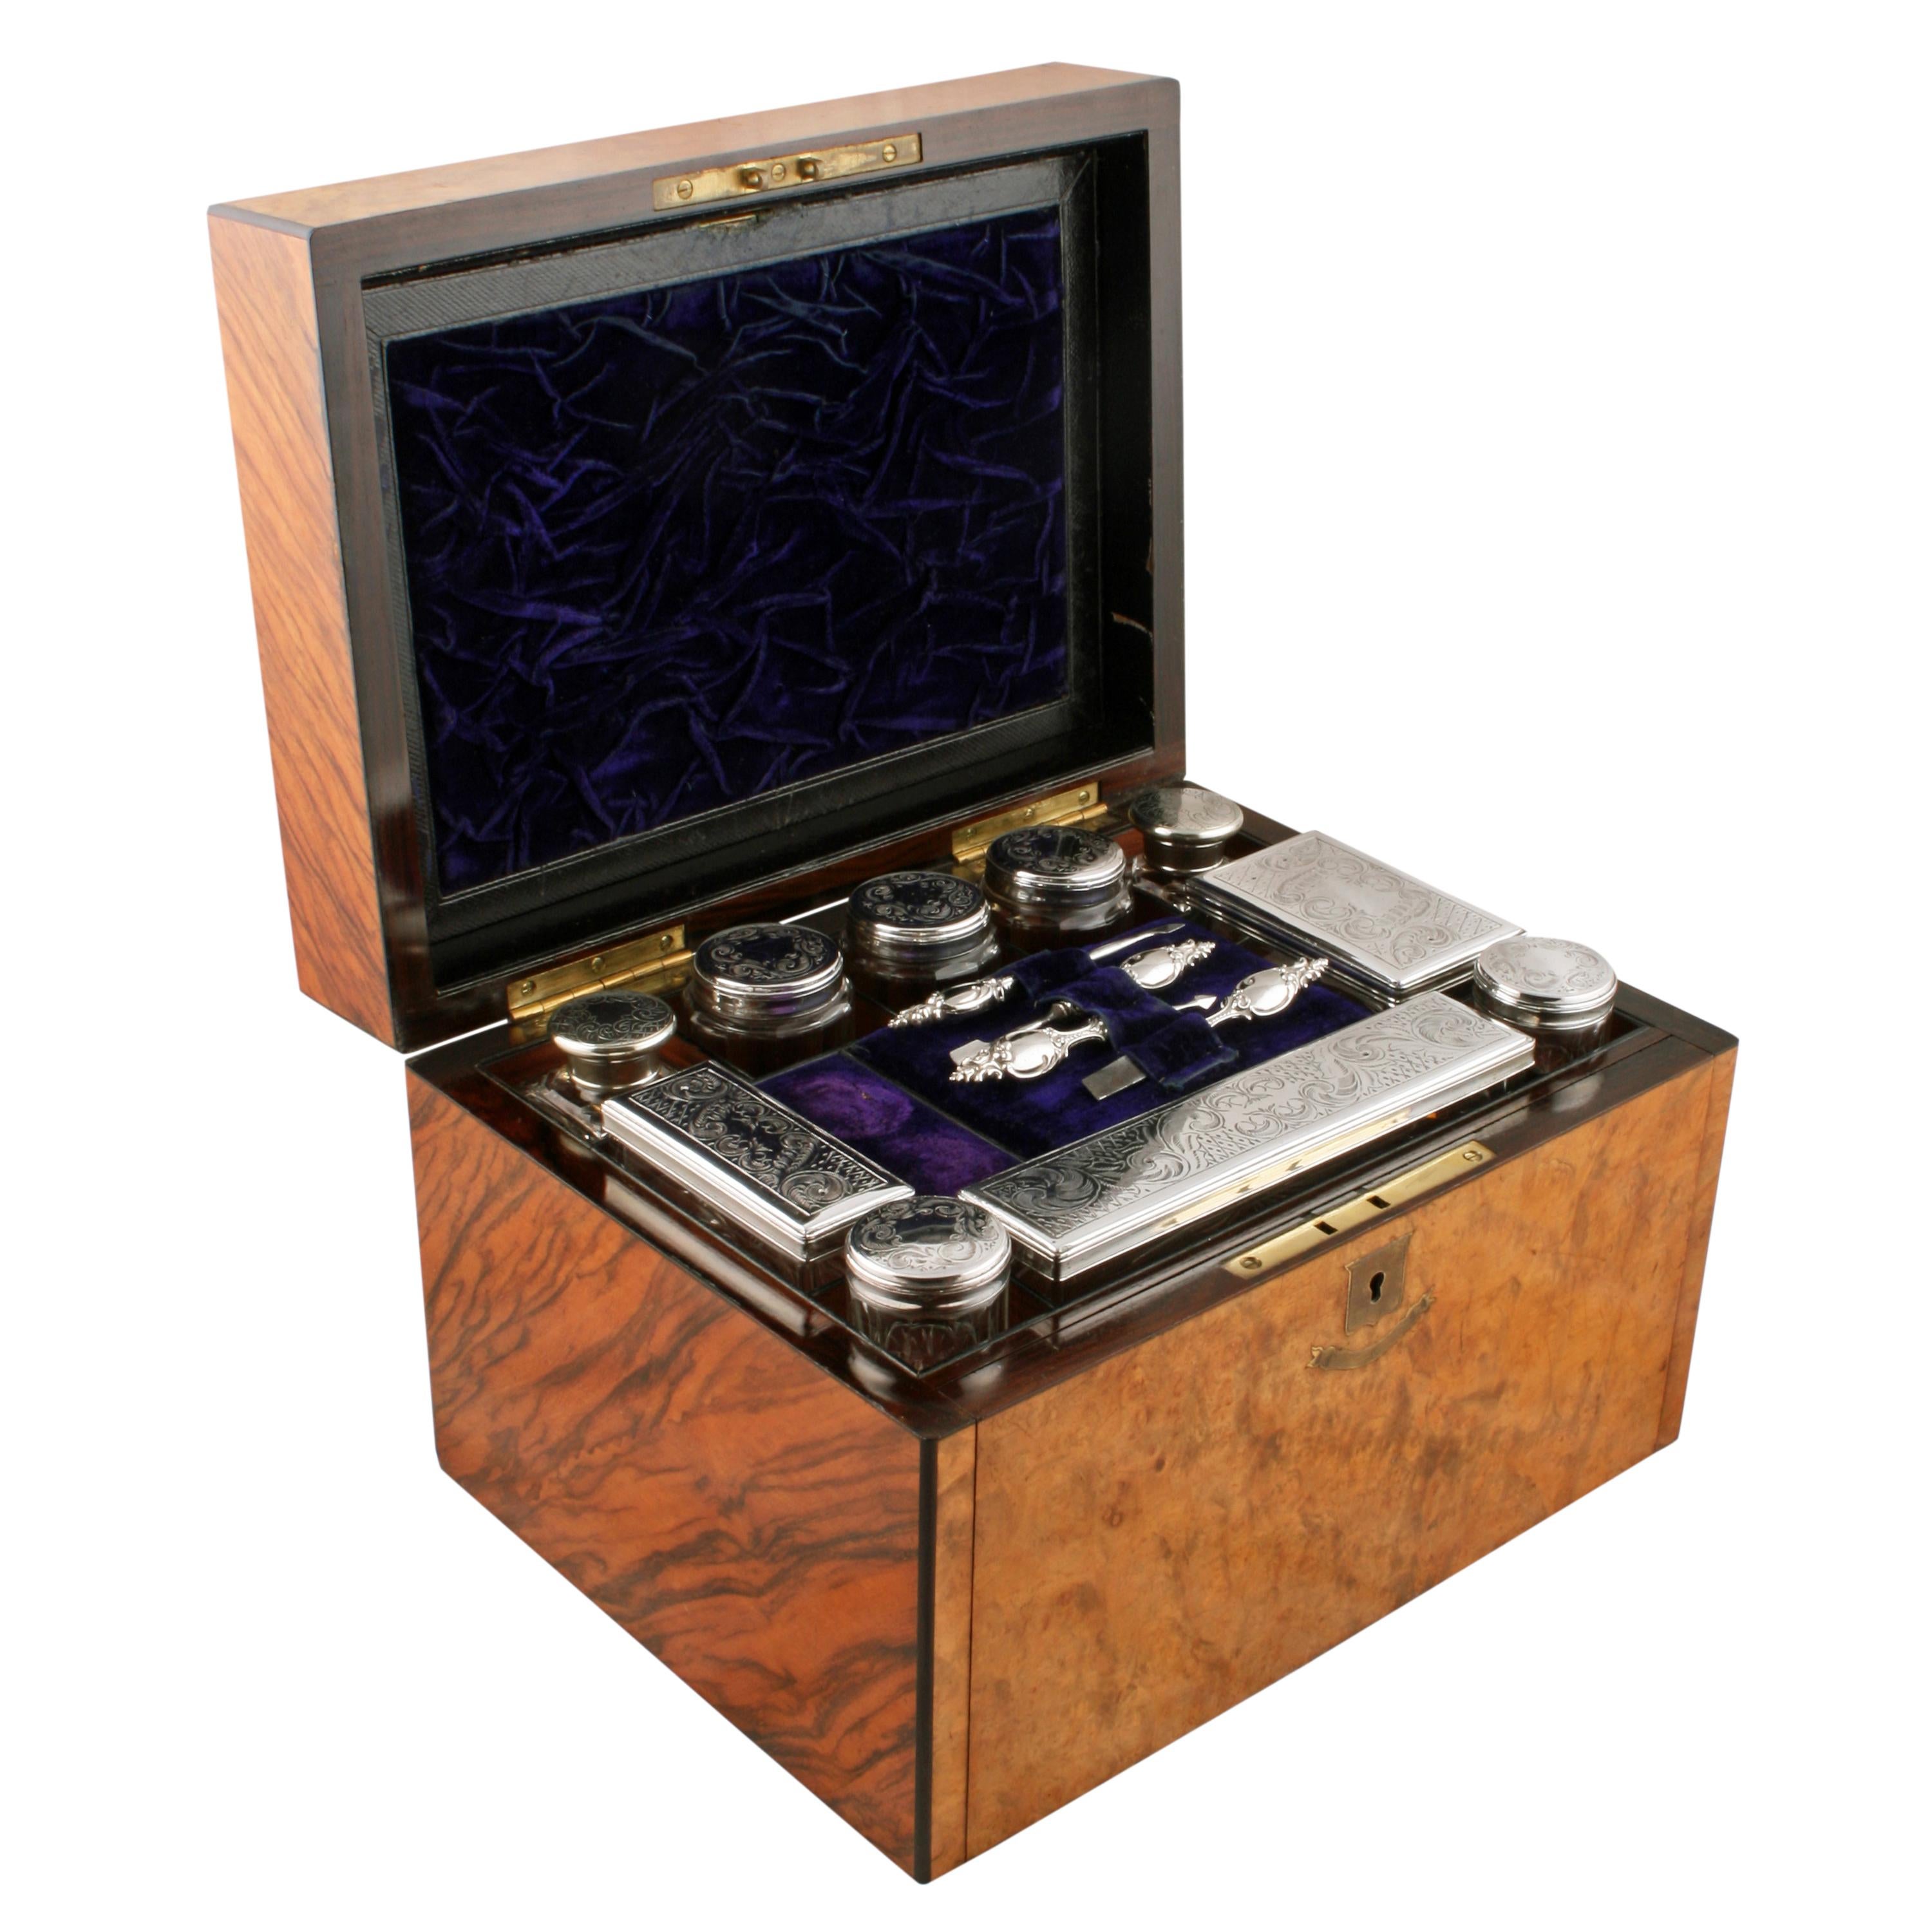 A 19th century Victorian burr walnut jewelry and dressing box.

The box has a hinged lid, a fitted interior and a front panel behind which are a pair of drawers.

The interior holds ten glass perfume and storage jars and bottles with silver